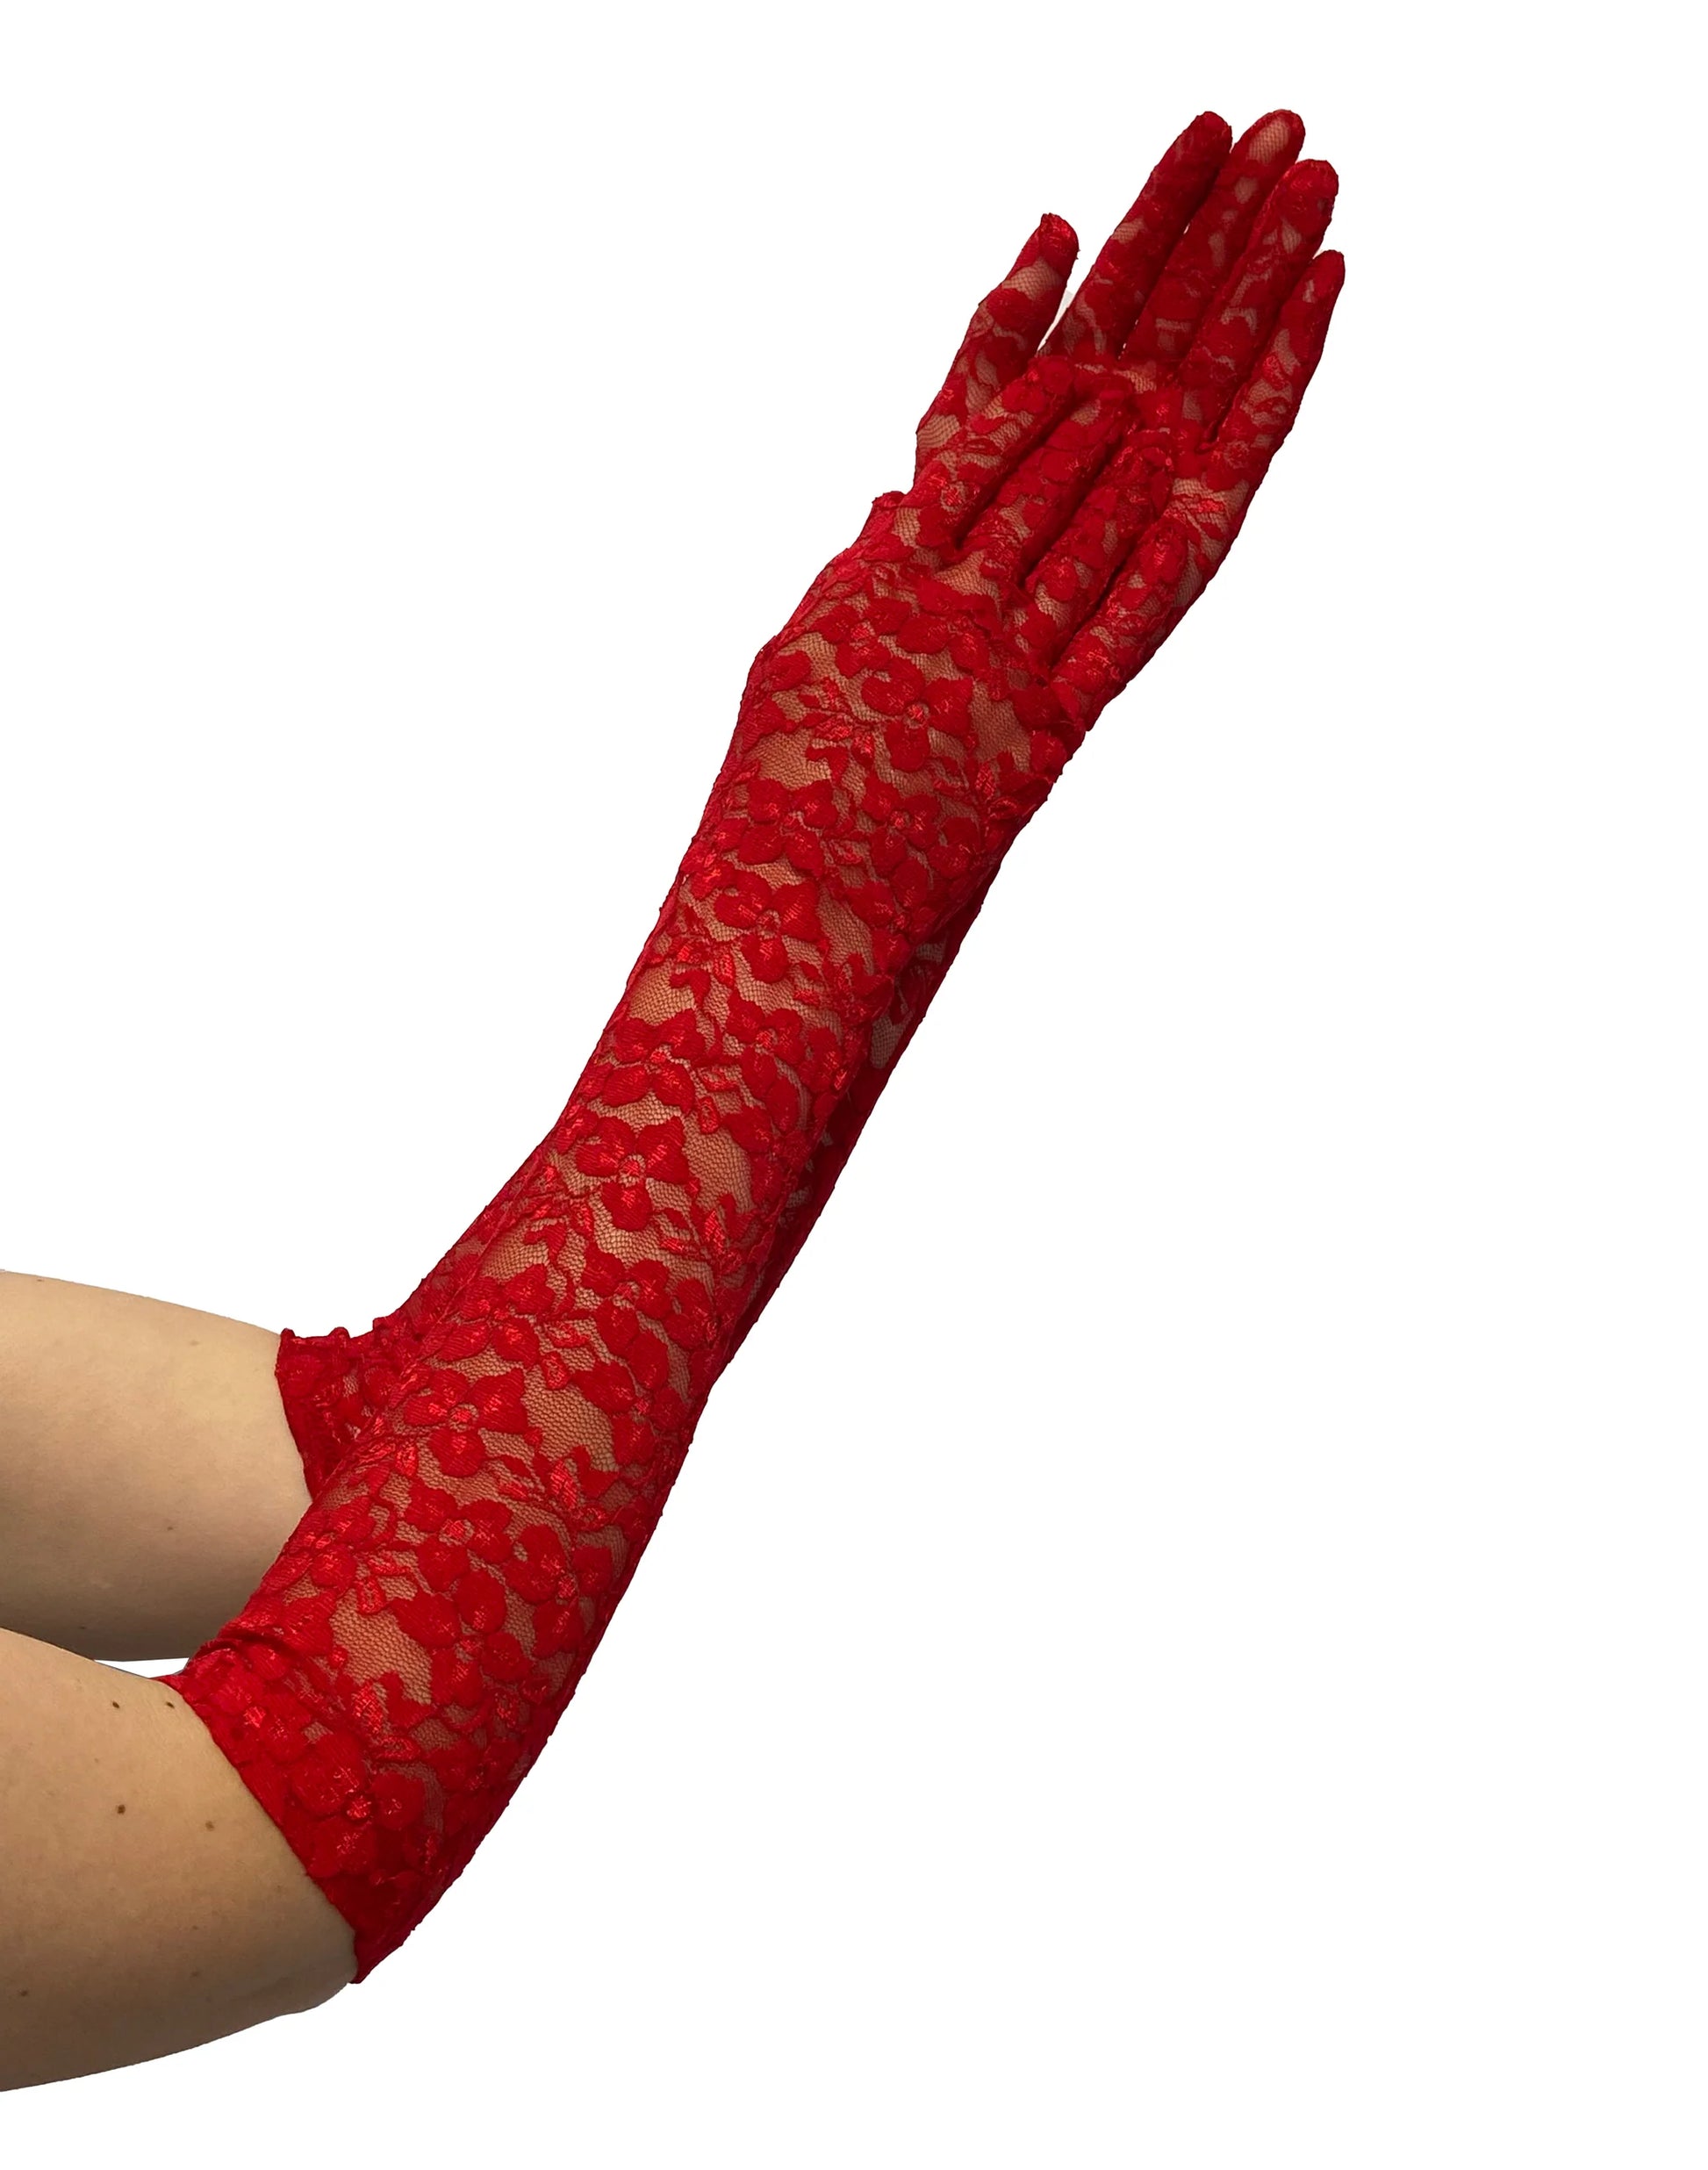 Pamela Mann Opera Lace Gloves - Red floral lace long over the elbow gloves.